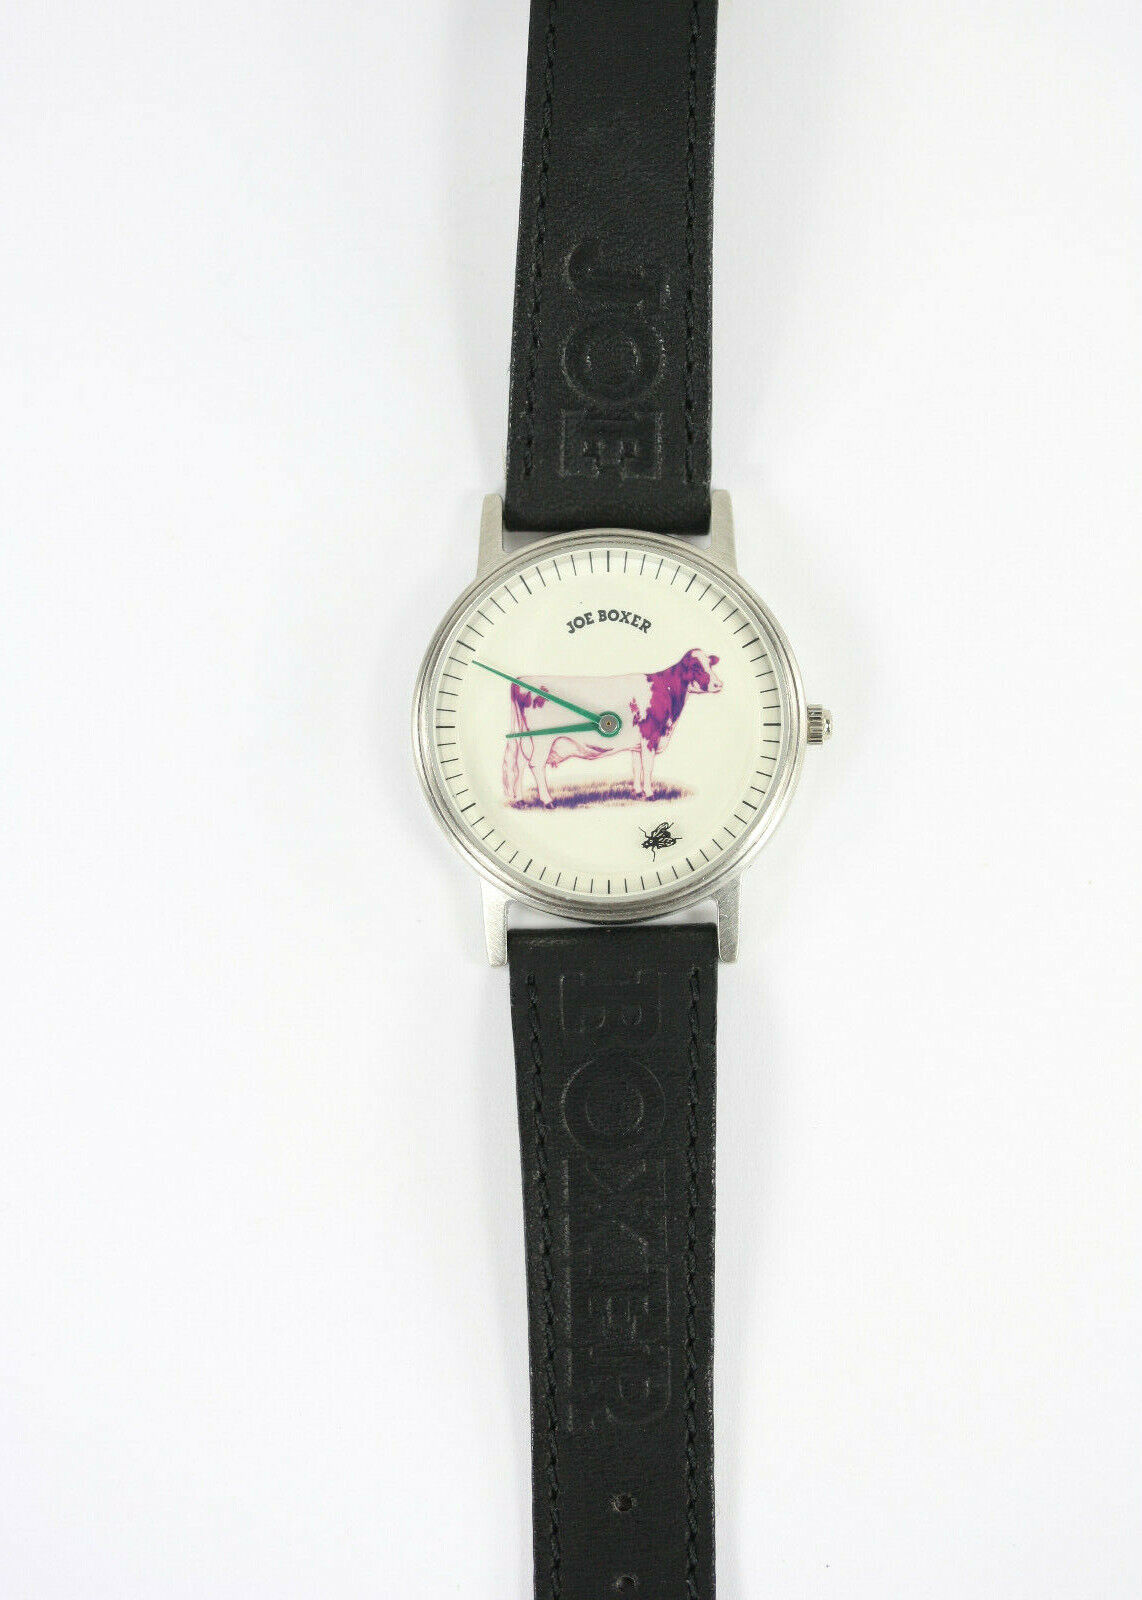 Joe Boxer Watch Unisex featuring a Cow and a Fly "Time Flies"  Brand New,Vintage